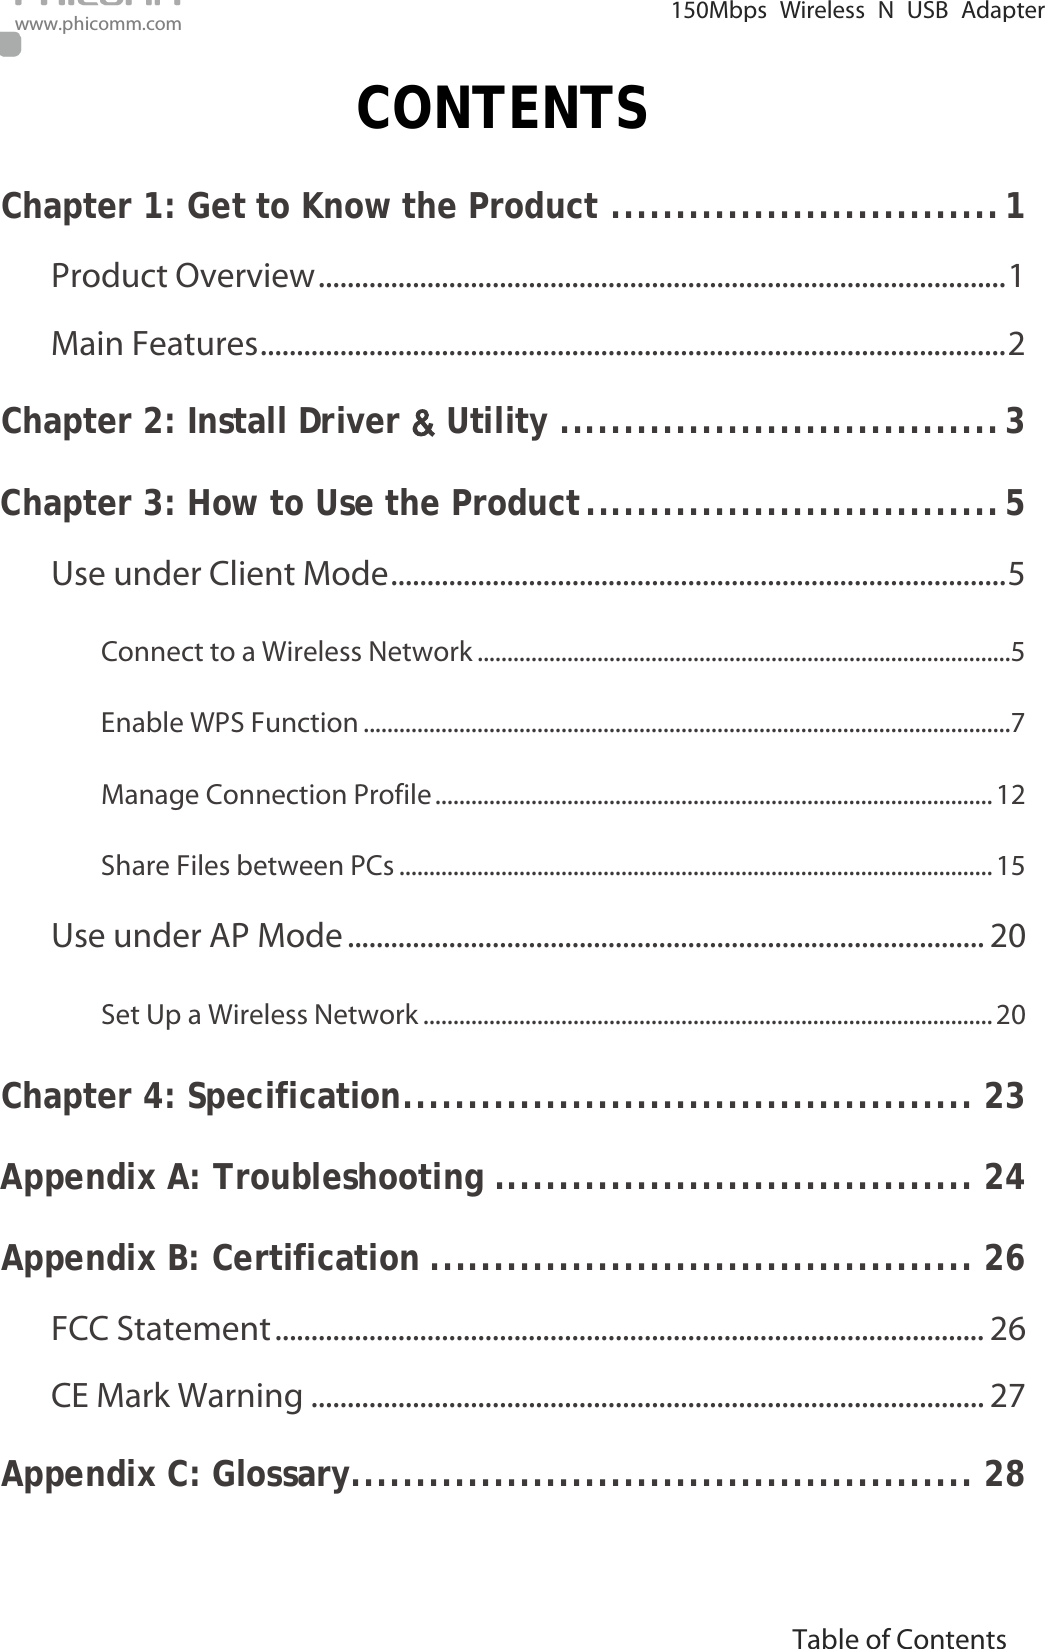                                                            i Table of Contents  150Mbps Wireless N USB Adapter  www.phicomm.com CONTENTS Chapter 1: Get to Know the Product   .............................. 1Product Overview   ............................................................................................... 1Main Features   ....................................................................................................... 2Chapter 2: Install Driver &amp; Utility   .................................. 3Chapter 3: How to Use the Product   ................................ 5Use under Client Mode   ..................................................................................... 5Connect to a Wireless Network   .........................................................................................5Enable WPS Function   ............................................................................................................7Manage Connection Profile   ............................................................................................. 12Share Files between PCs   ................................................................................................... 15Use under AP Mode   ........................................................................................ 20Set Up a Wireless Network   ............................................................................................... 20Chapter 4: Specification   ............................................ 23Appendix A: Troubleshooting   ..................................... 24Appendix B: Certification   .......................................... 26FCC Statement   .................................................................................................. 26CE Mark Warning   ............................................................................................. 27Appendix C: Glossary   ................................................ 28 